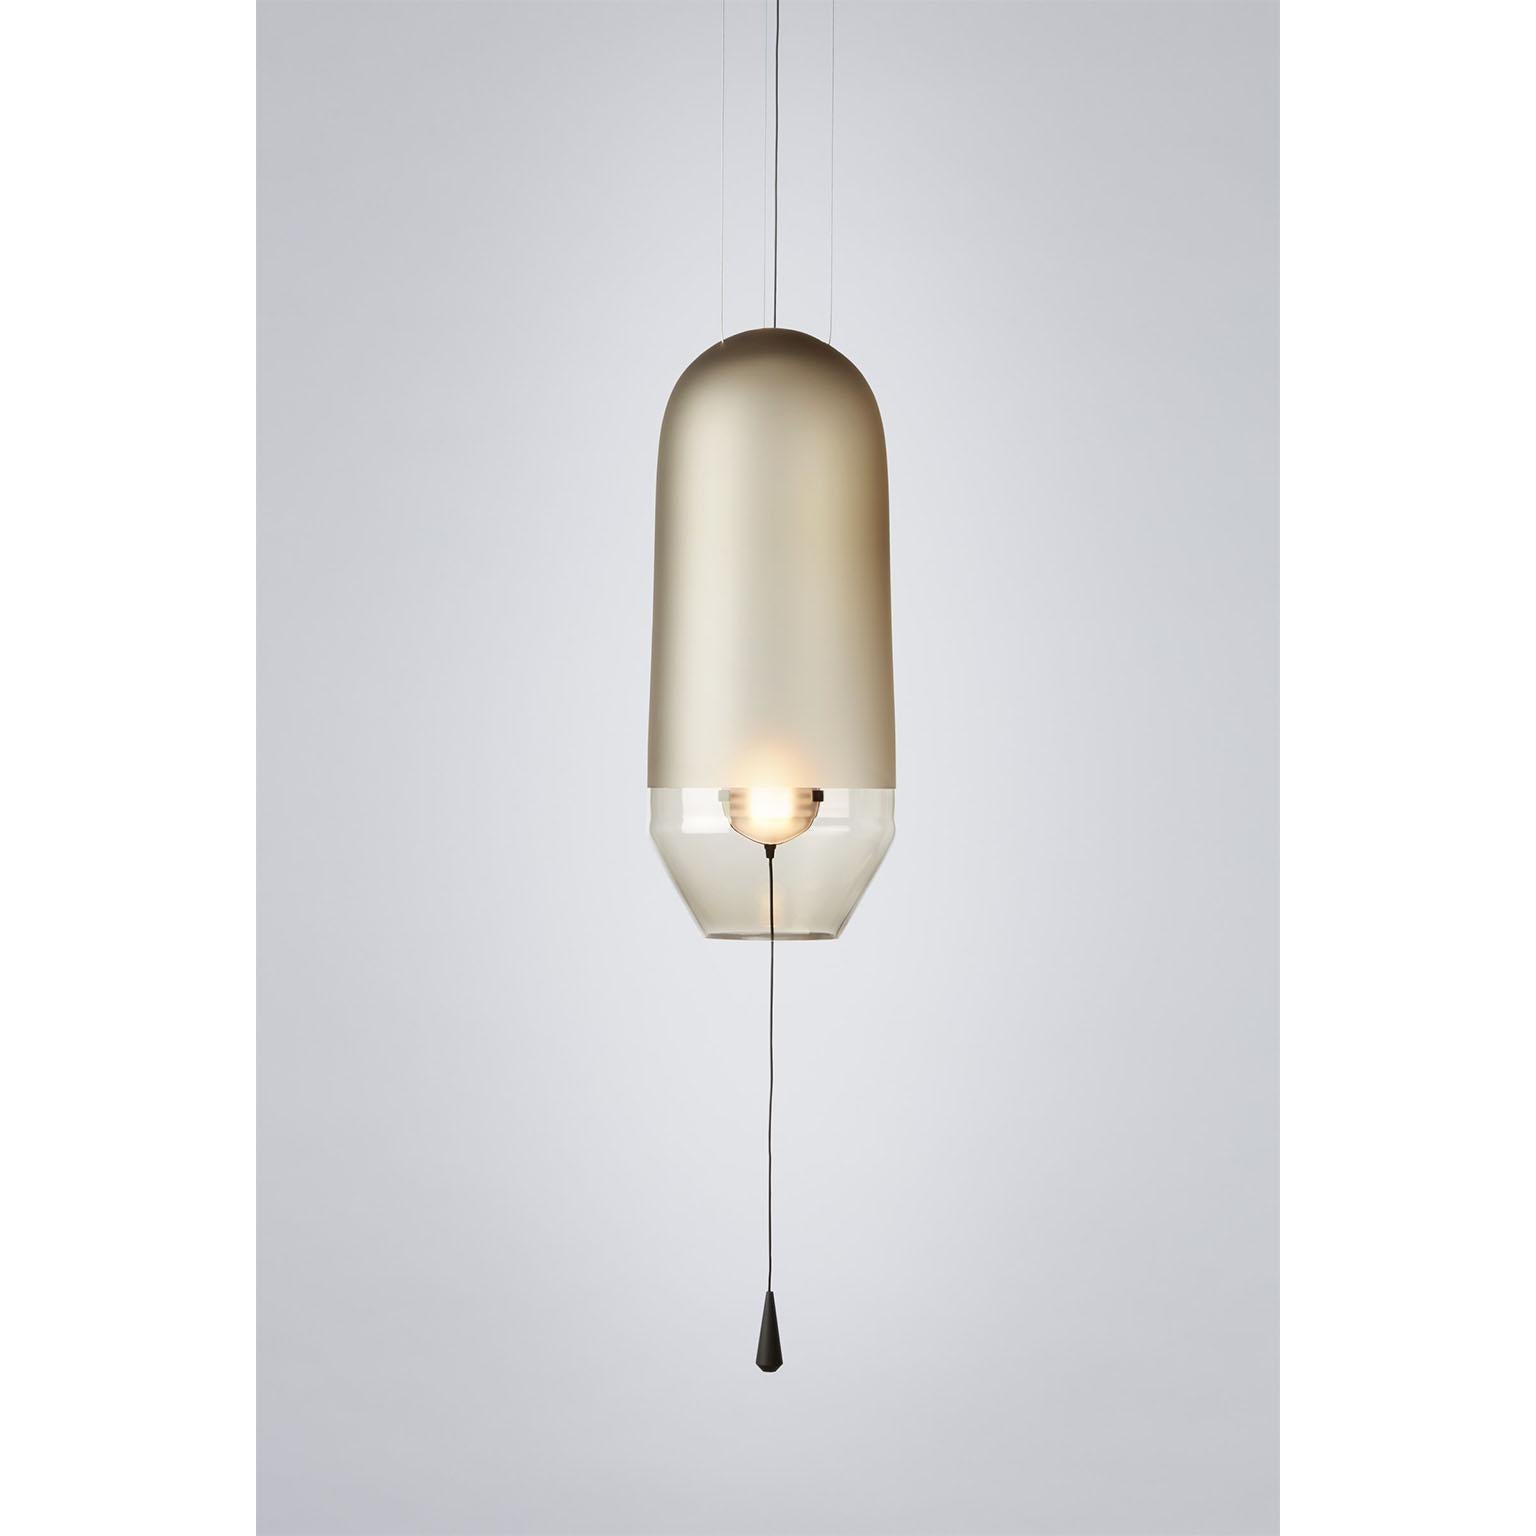 Our limpid light size S is a pendant light, decorative light, made in Europe.
The Limpid Lights collection, a series of lighting objects that incorporate movement as a key element of its design.
By moving the light source away from, or closer to the